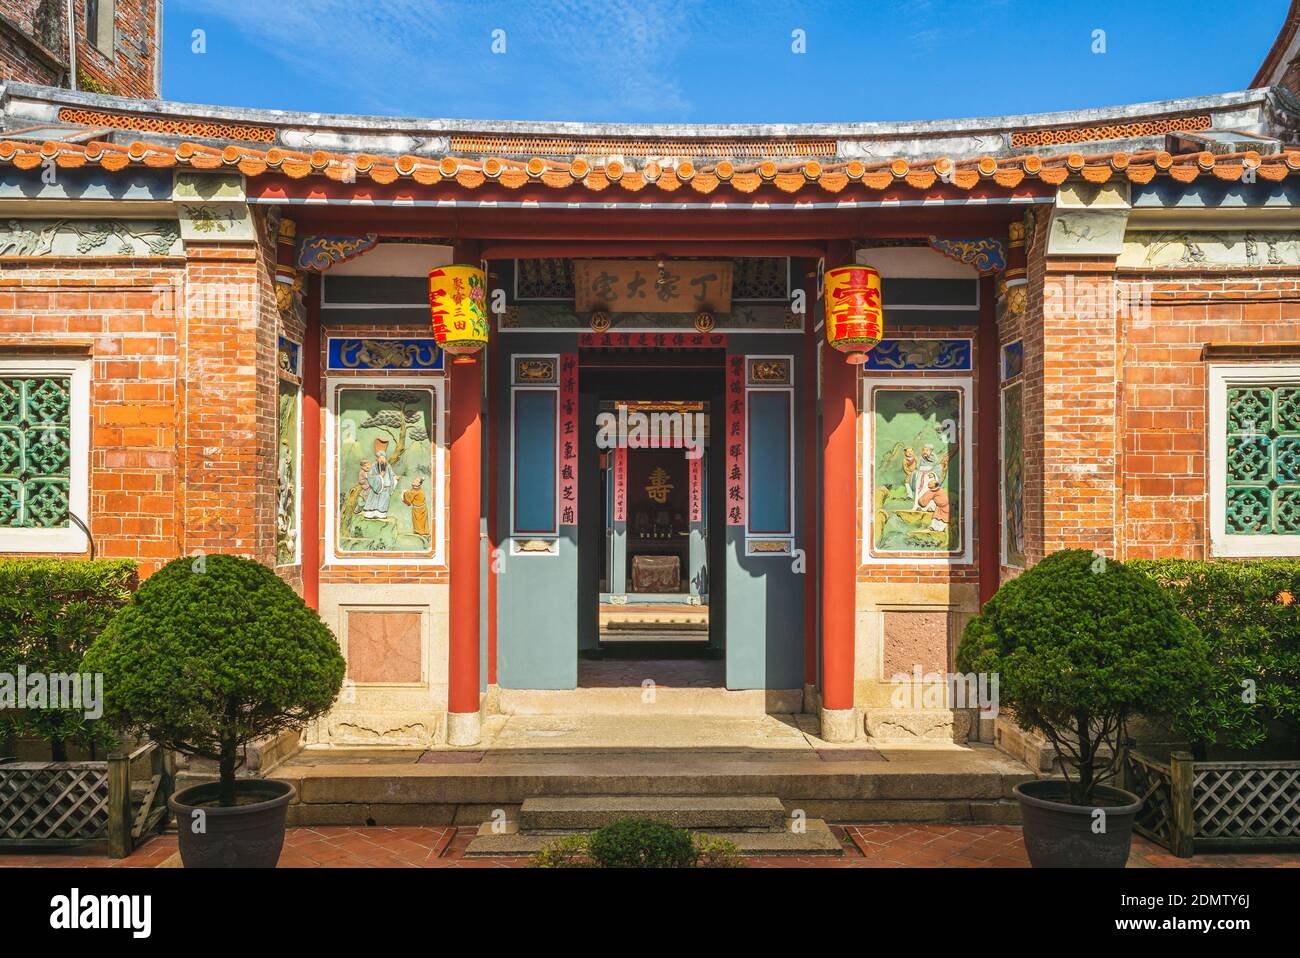 October 30, 2020: Ding family mansion, the most completed street house preserved in lukang township, taiwan. It was built in 1893 by ding family who h Stock Photo